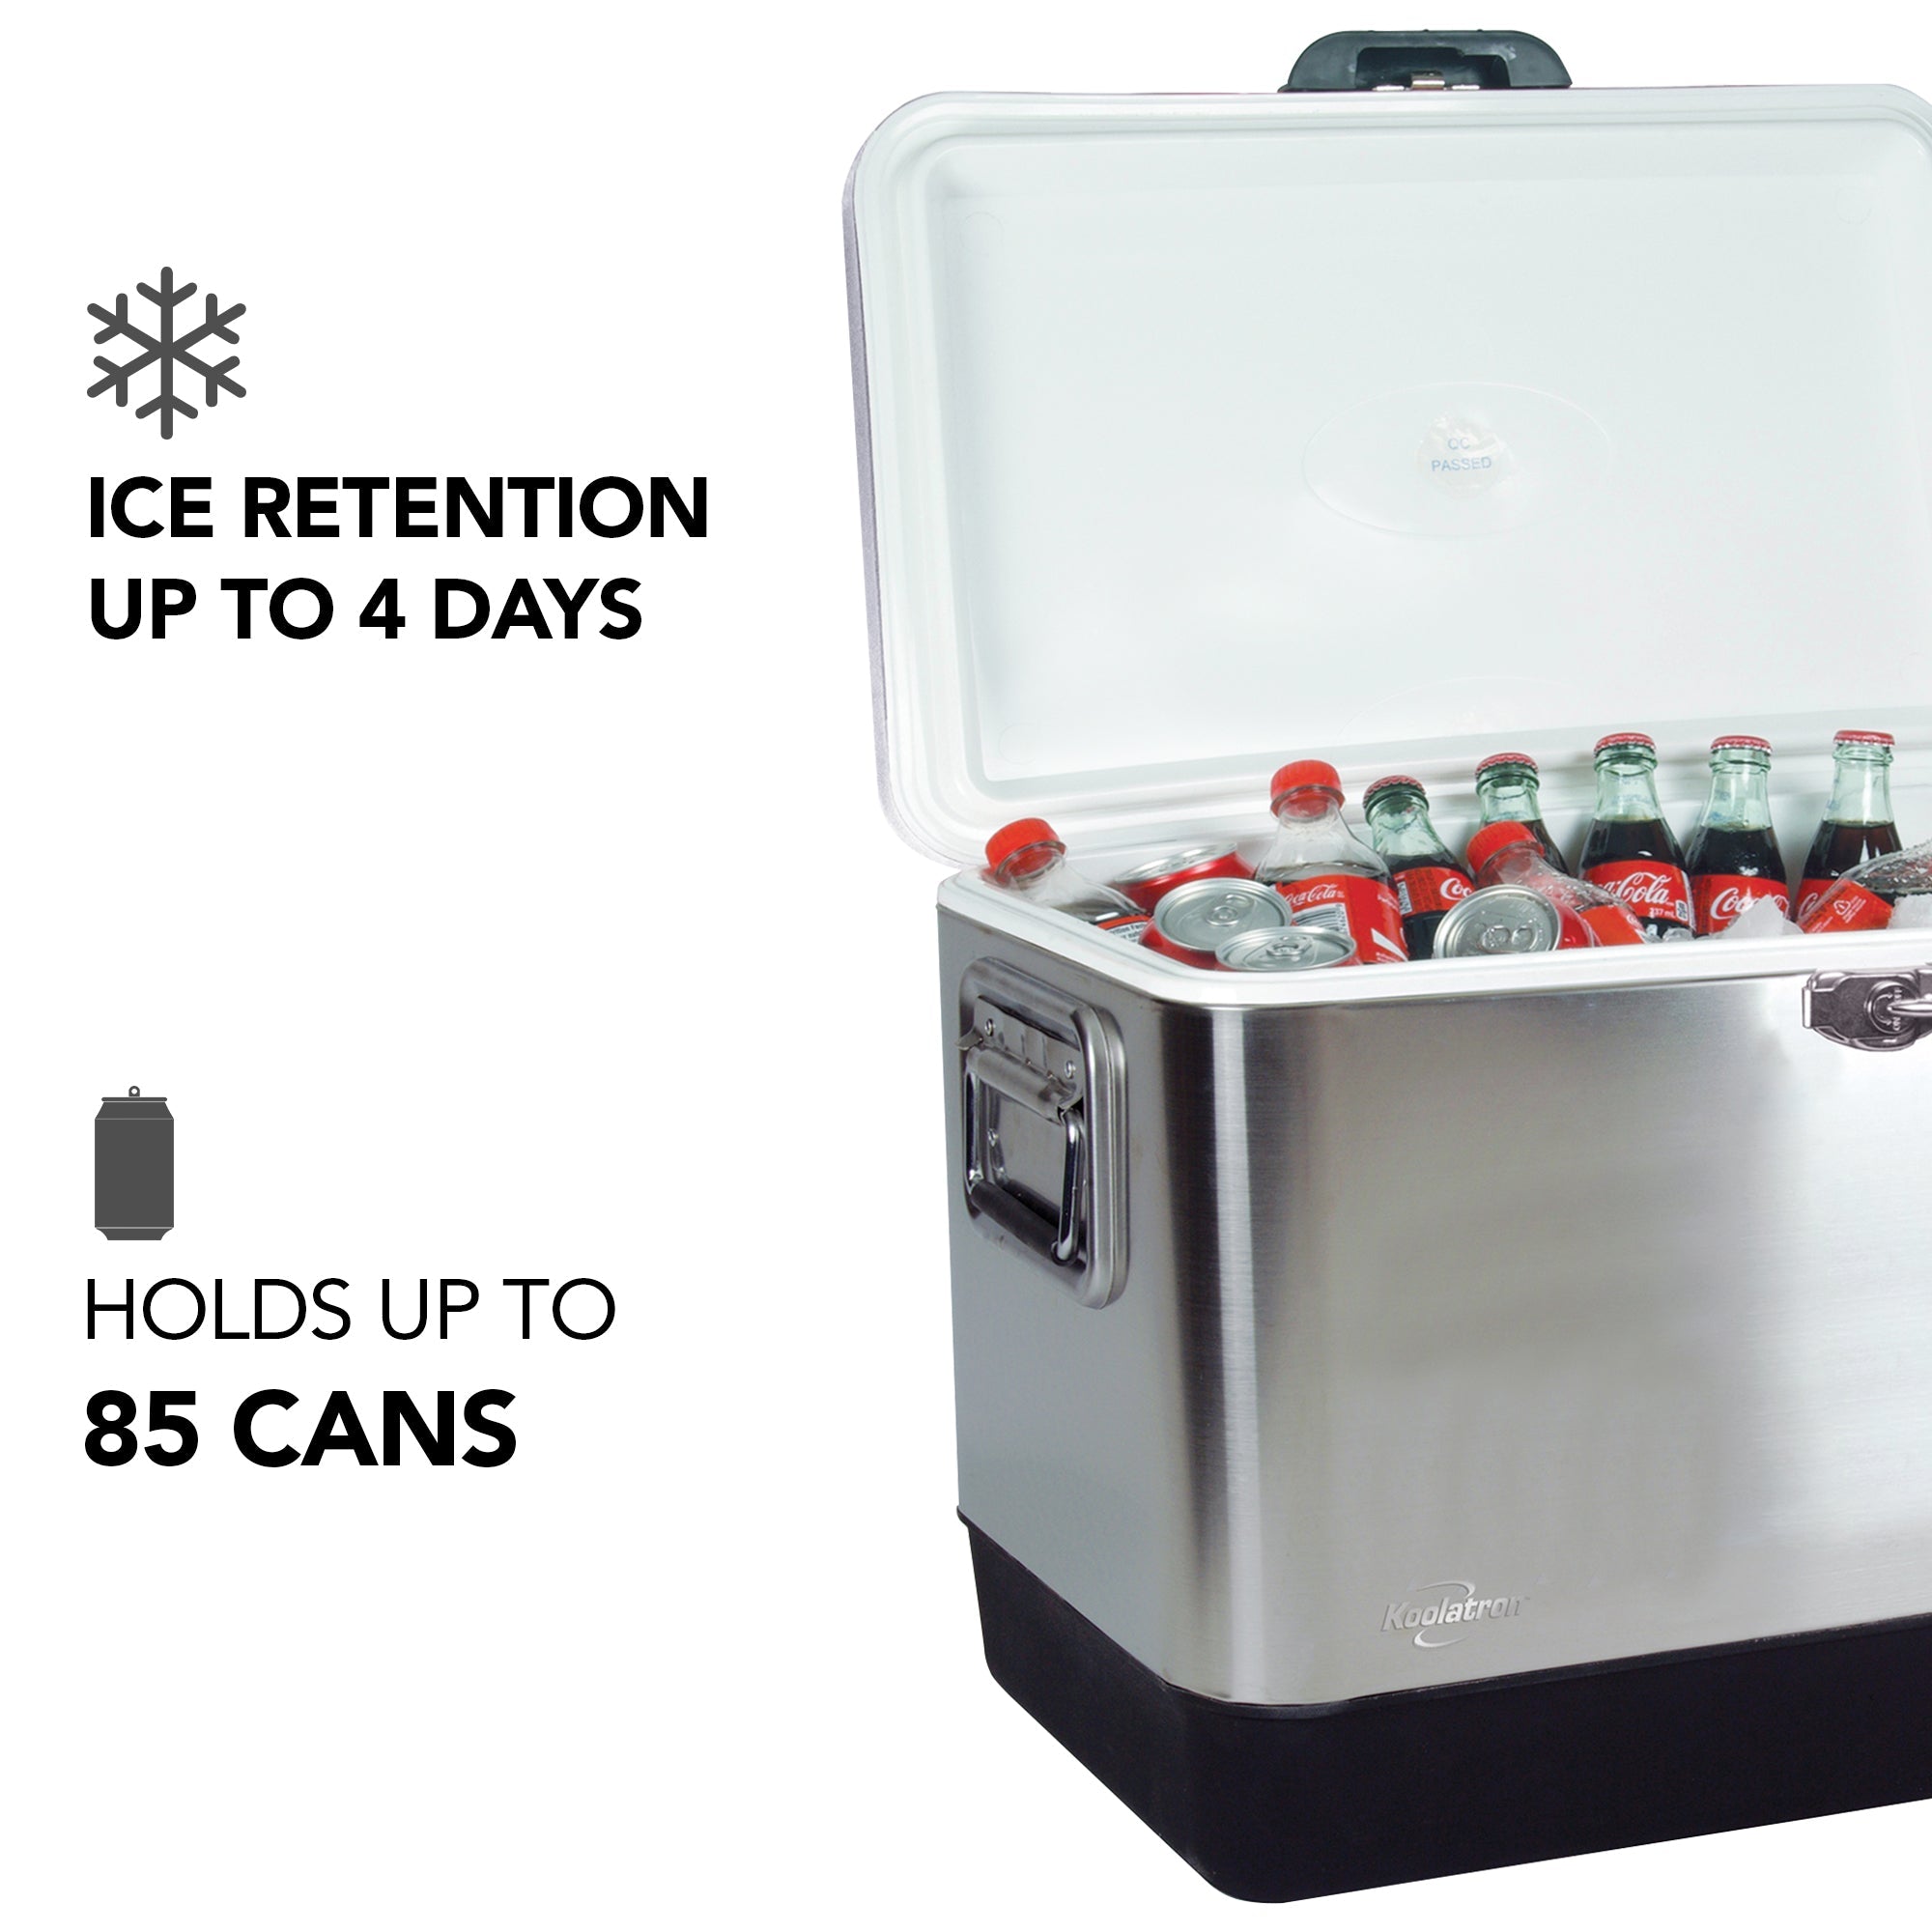 Product shot of Koolatron stainless steel 51 L ice chest, open with ice and cans of soda inside, on a white background. Text and icons to the left describe: Ice retention up to 4 days; holds up to 85 cans